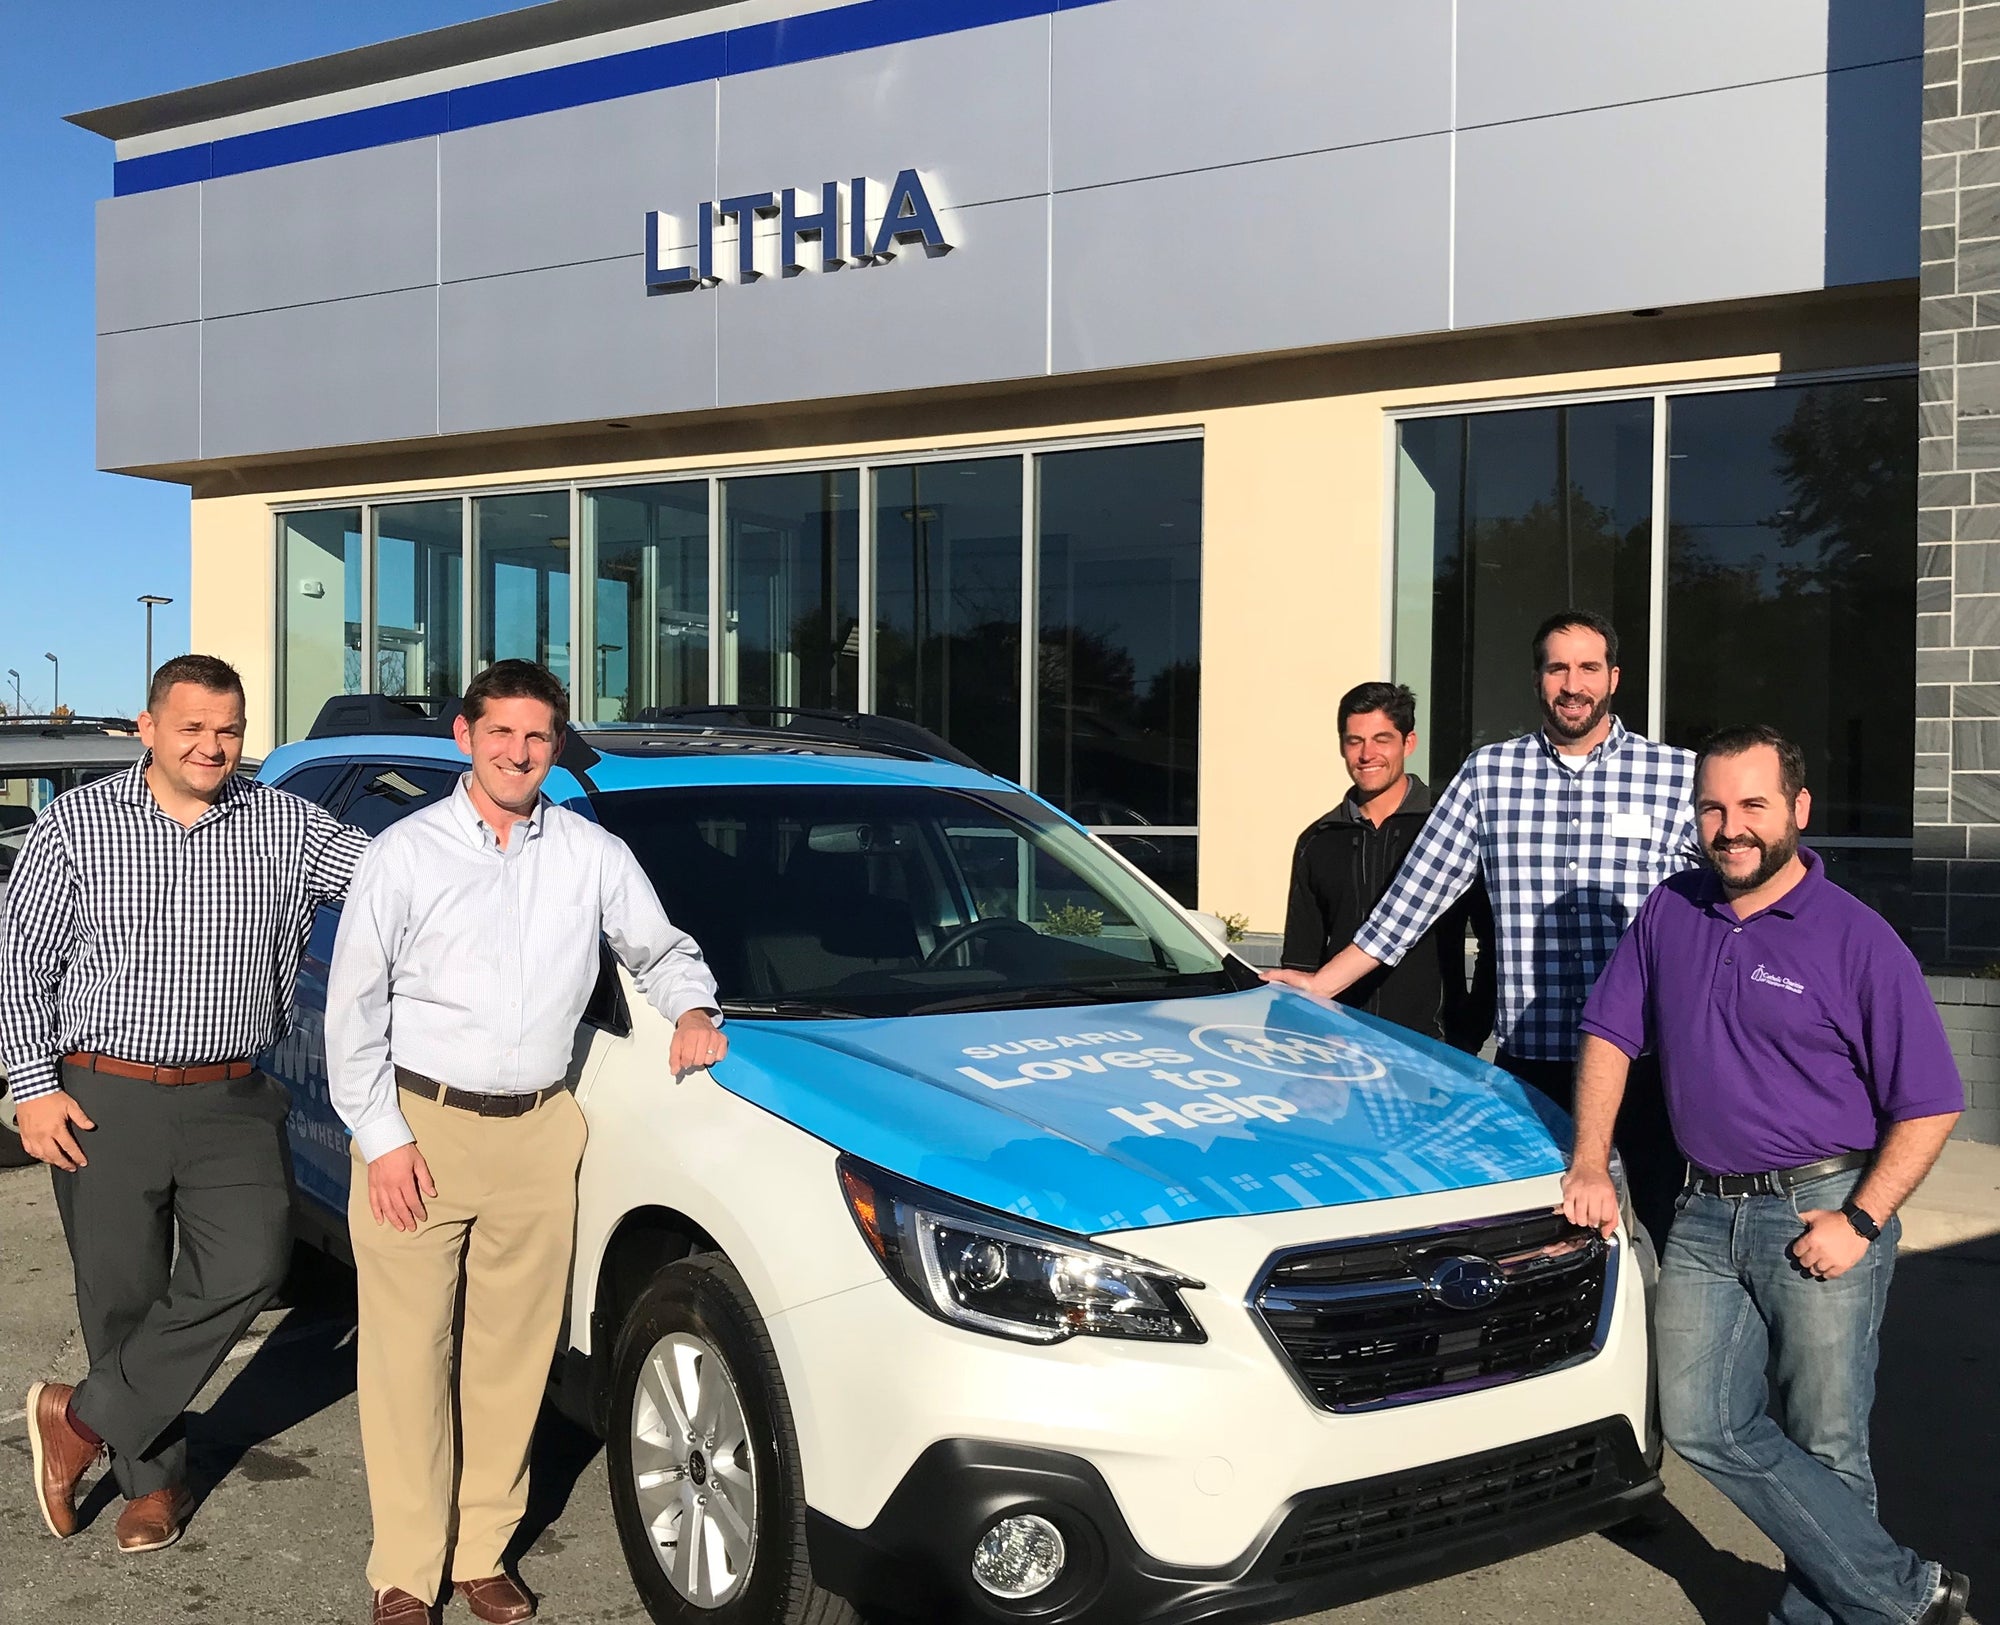 Subaru Donates New Vehicle to CCNN to Help Deliver Meals to Seniors in Need